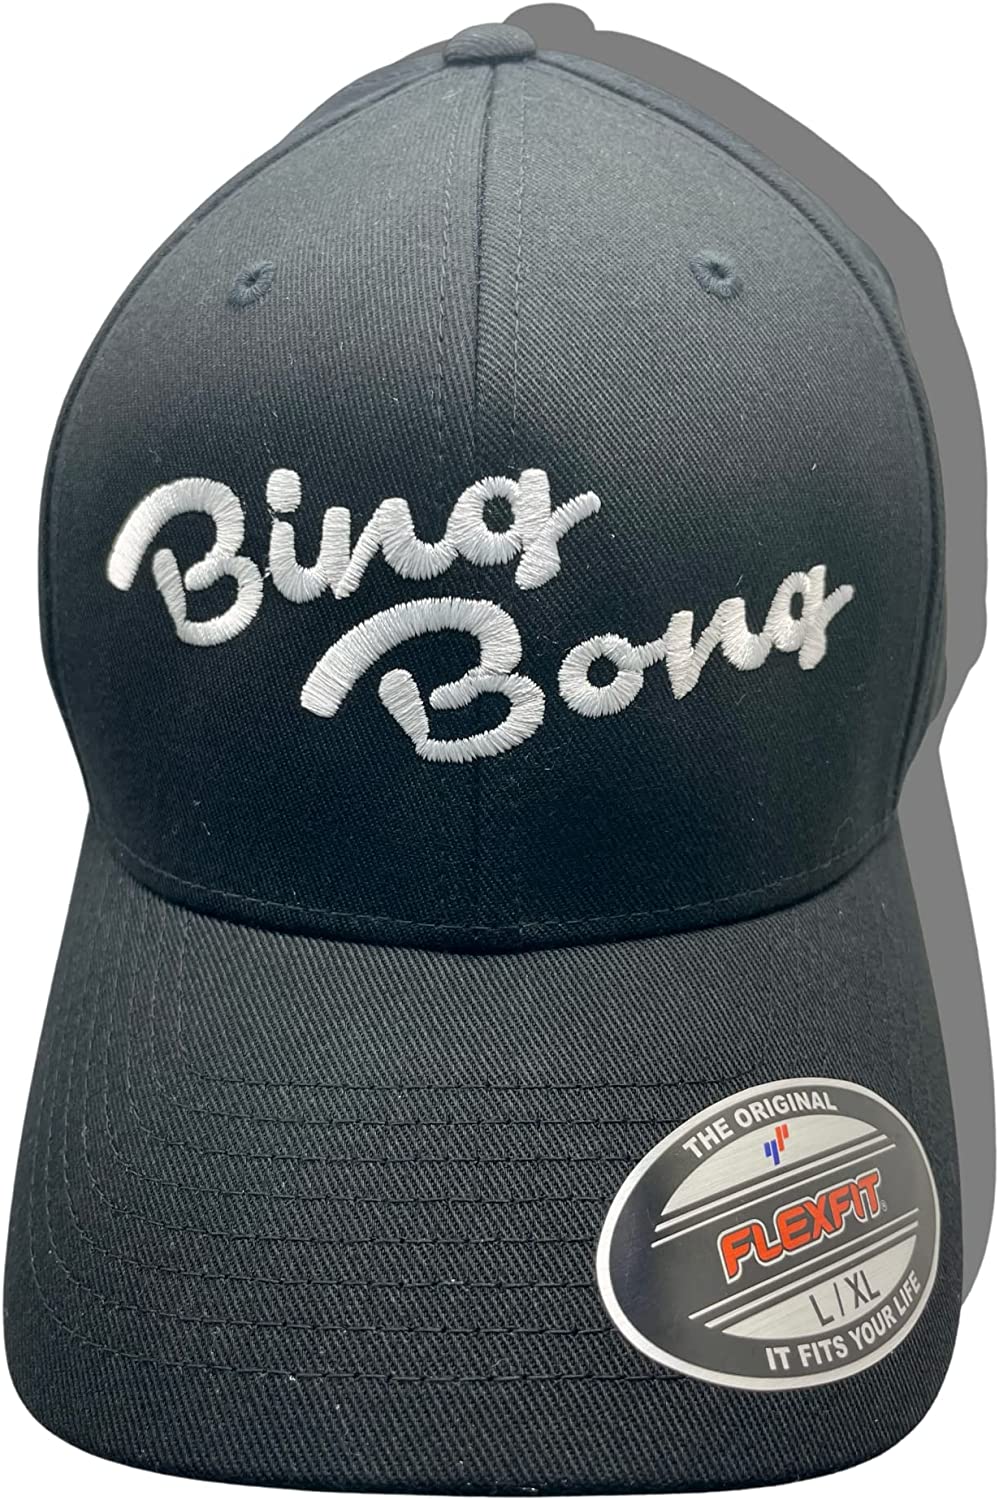 Bing Bong – Flex Fit, Fitted Hat, by Pats Hats